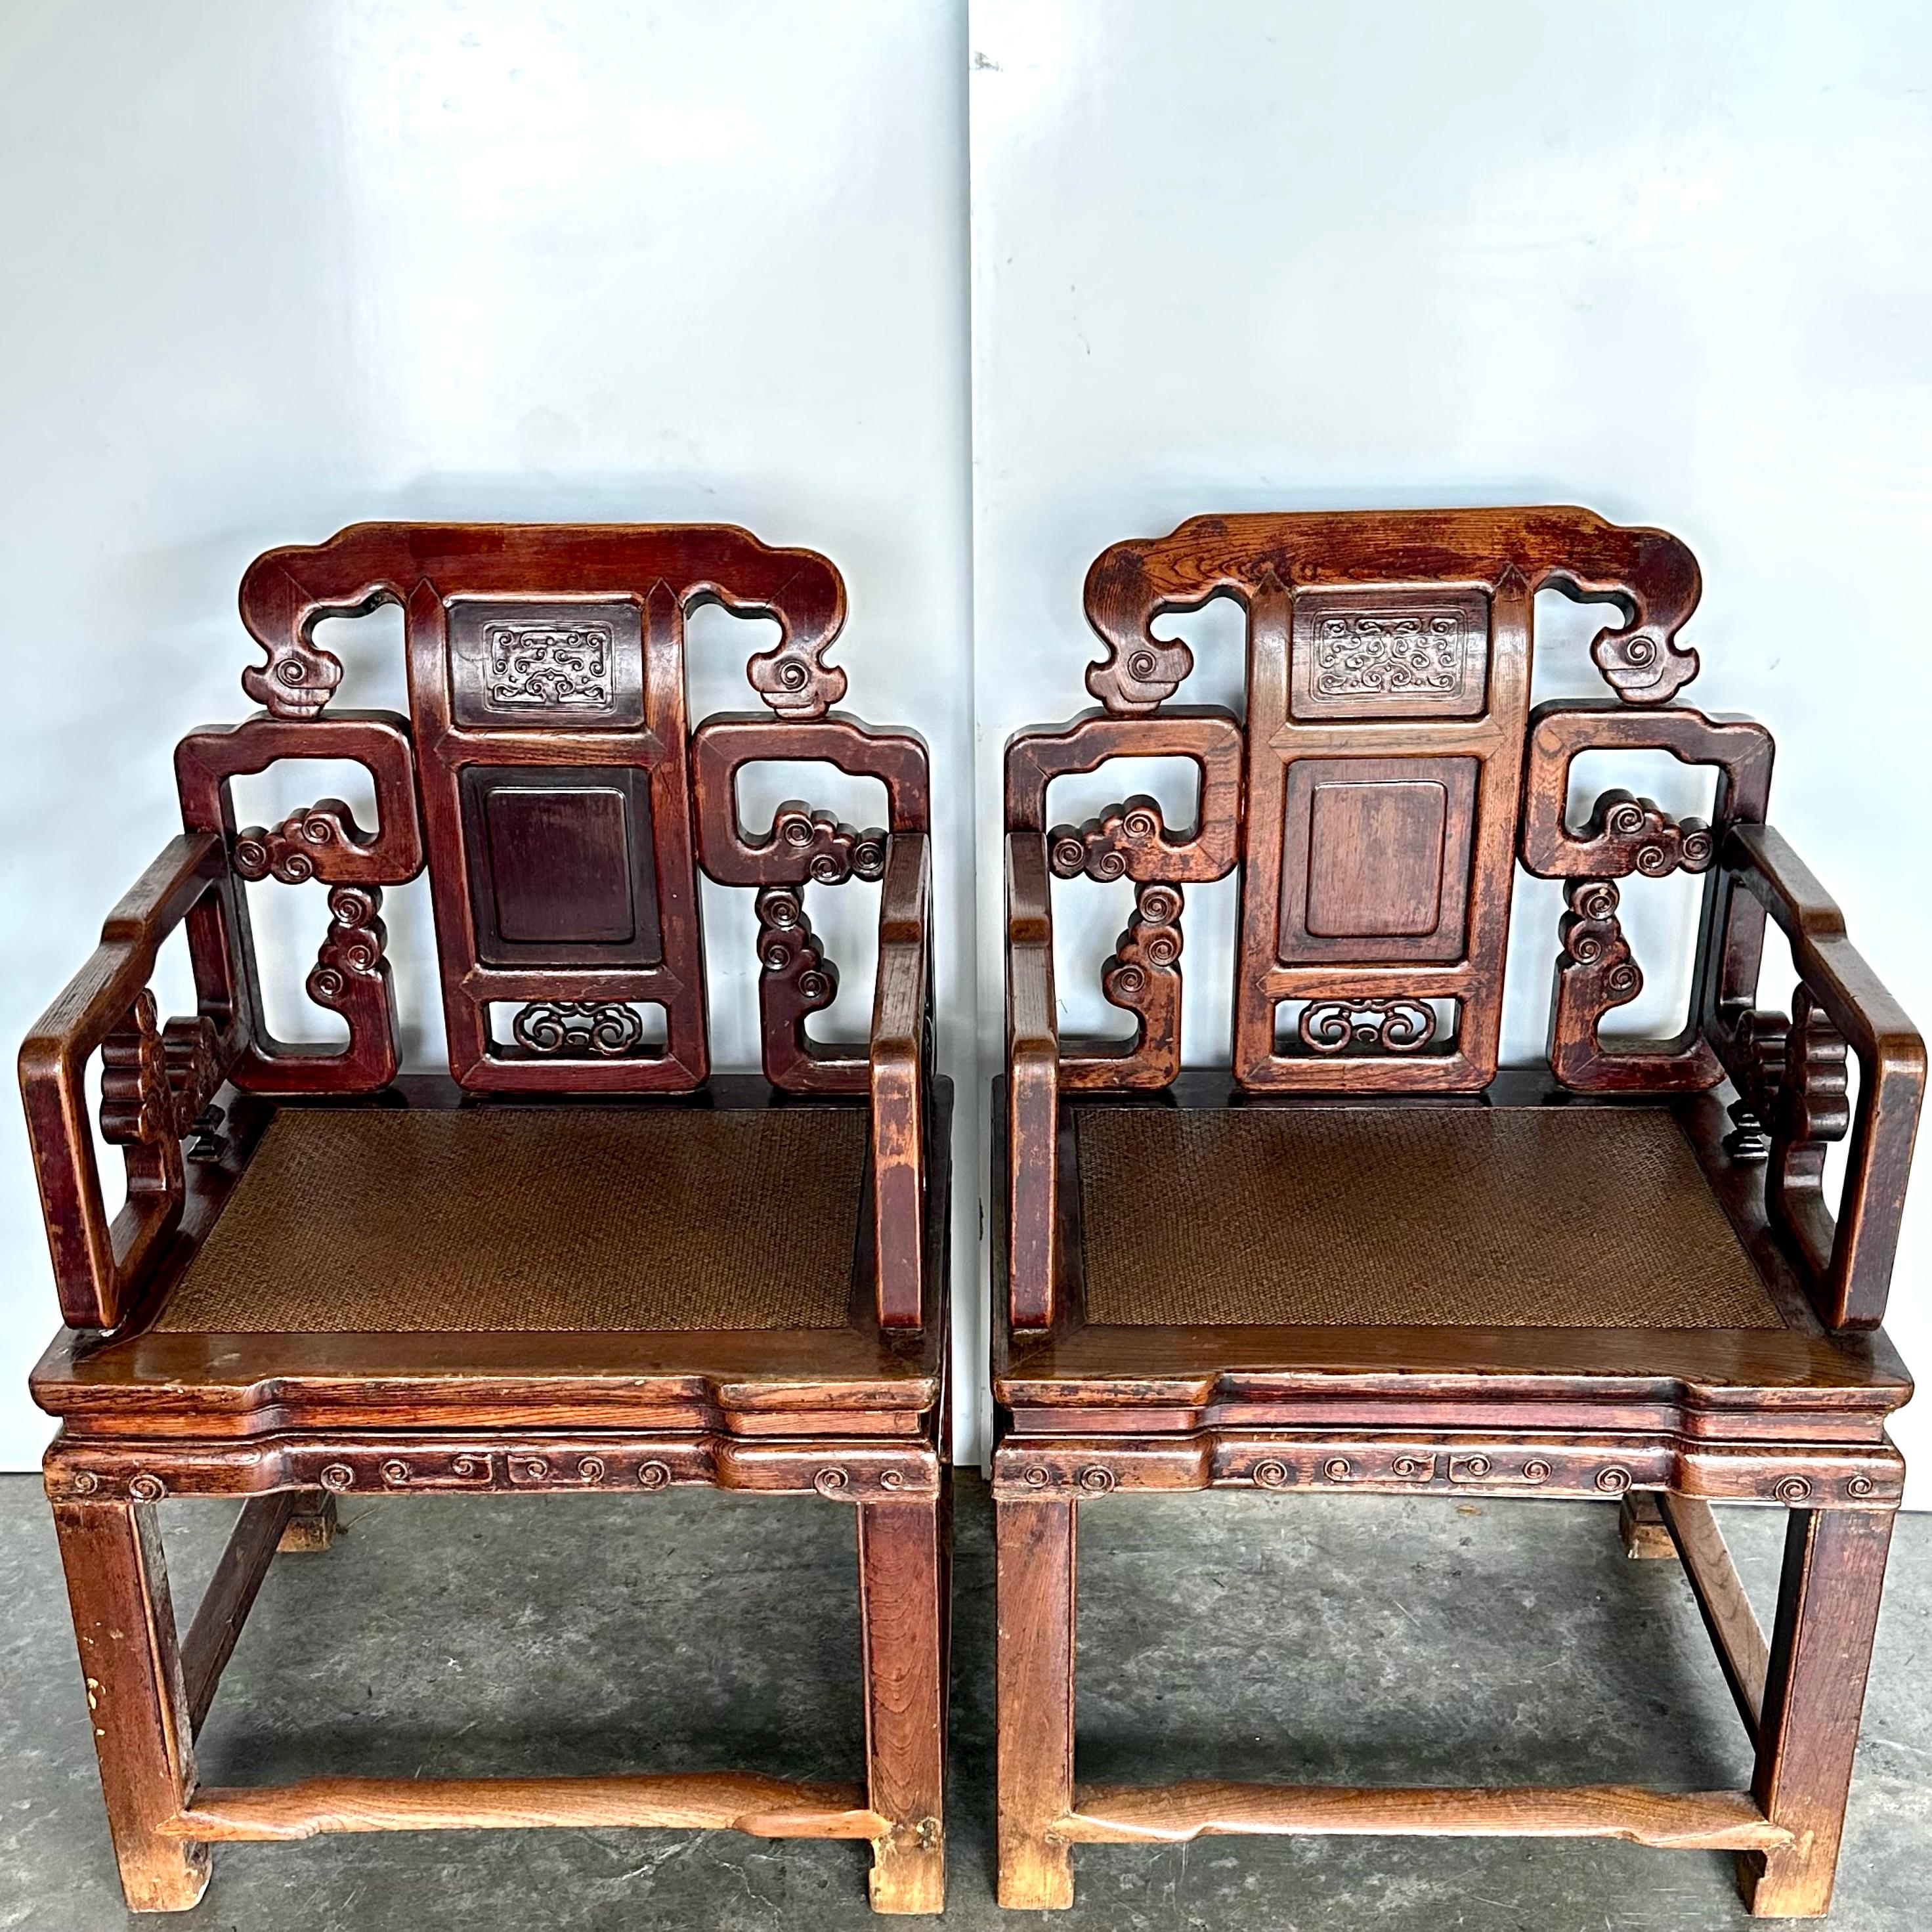 A pair of late Qing large Jumu (southern Elm) armchairs. This type of armchairs where the chair's back, arms and seat are at 90 degrees angles to each other is commonly referred to as 